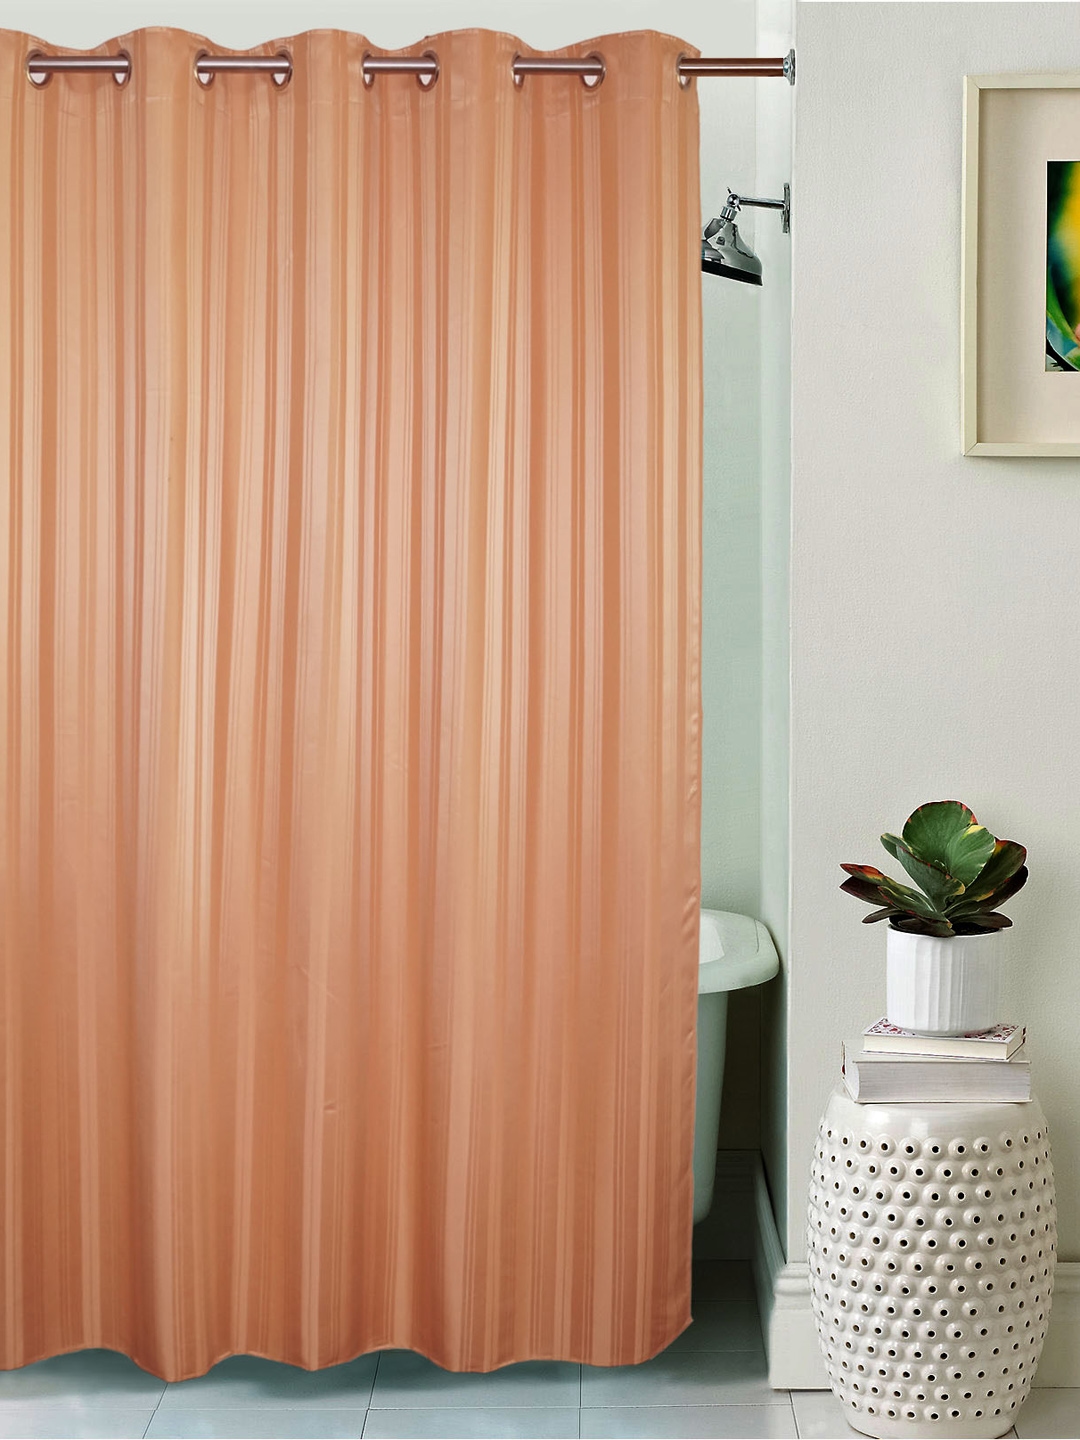 Lushomes Striped Peach Polyester Shower Curtain